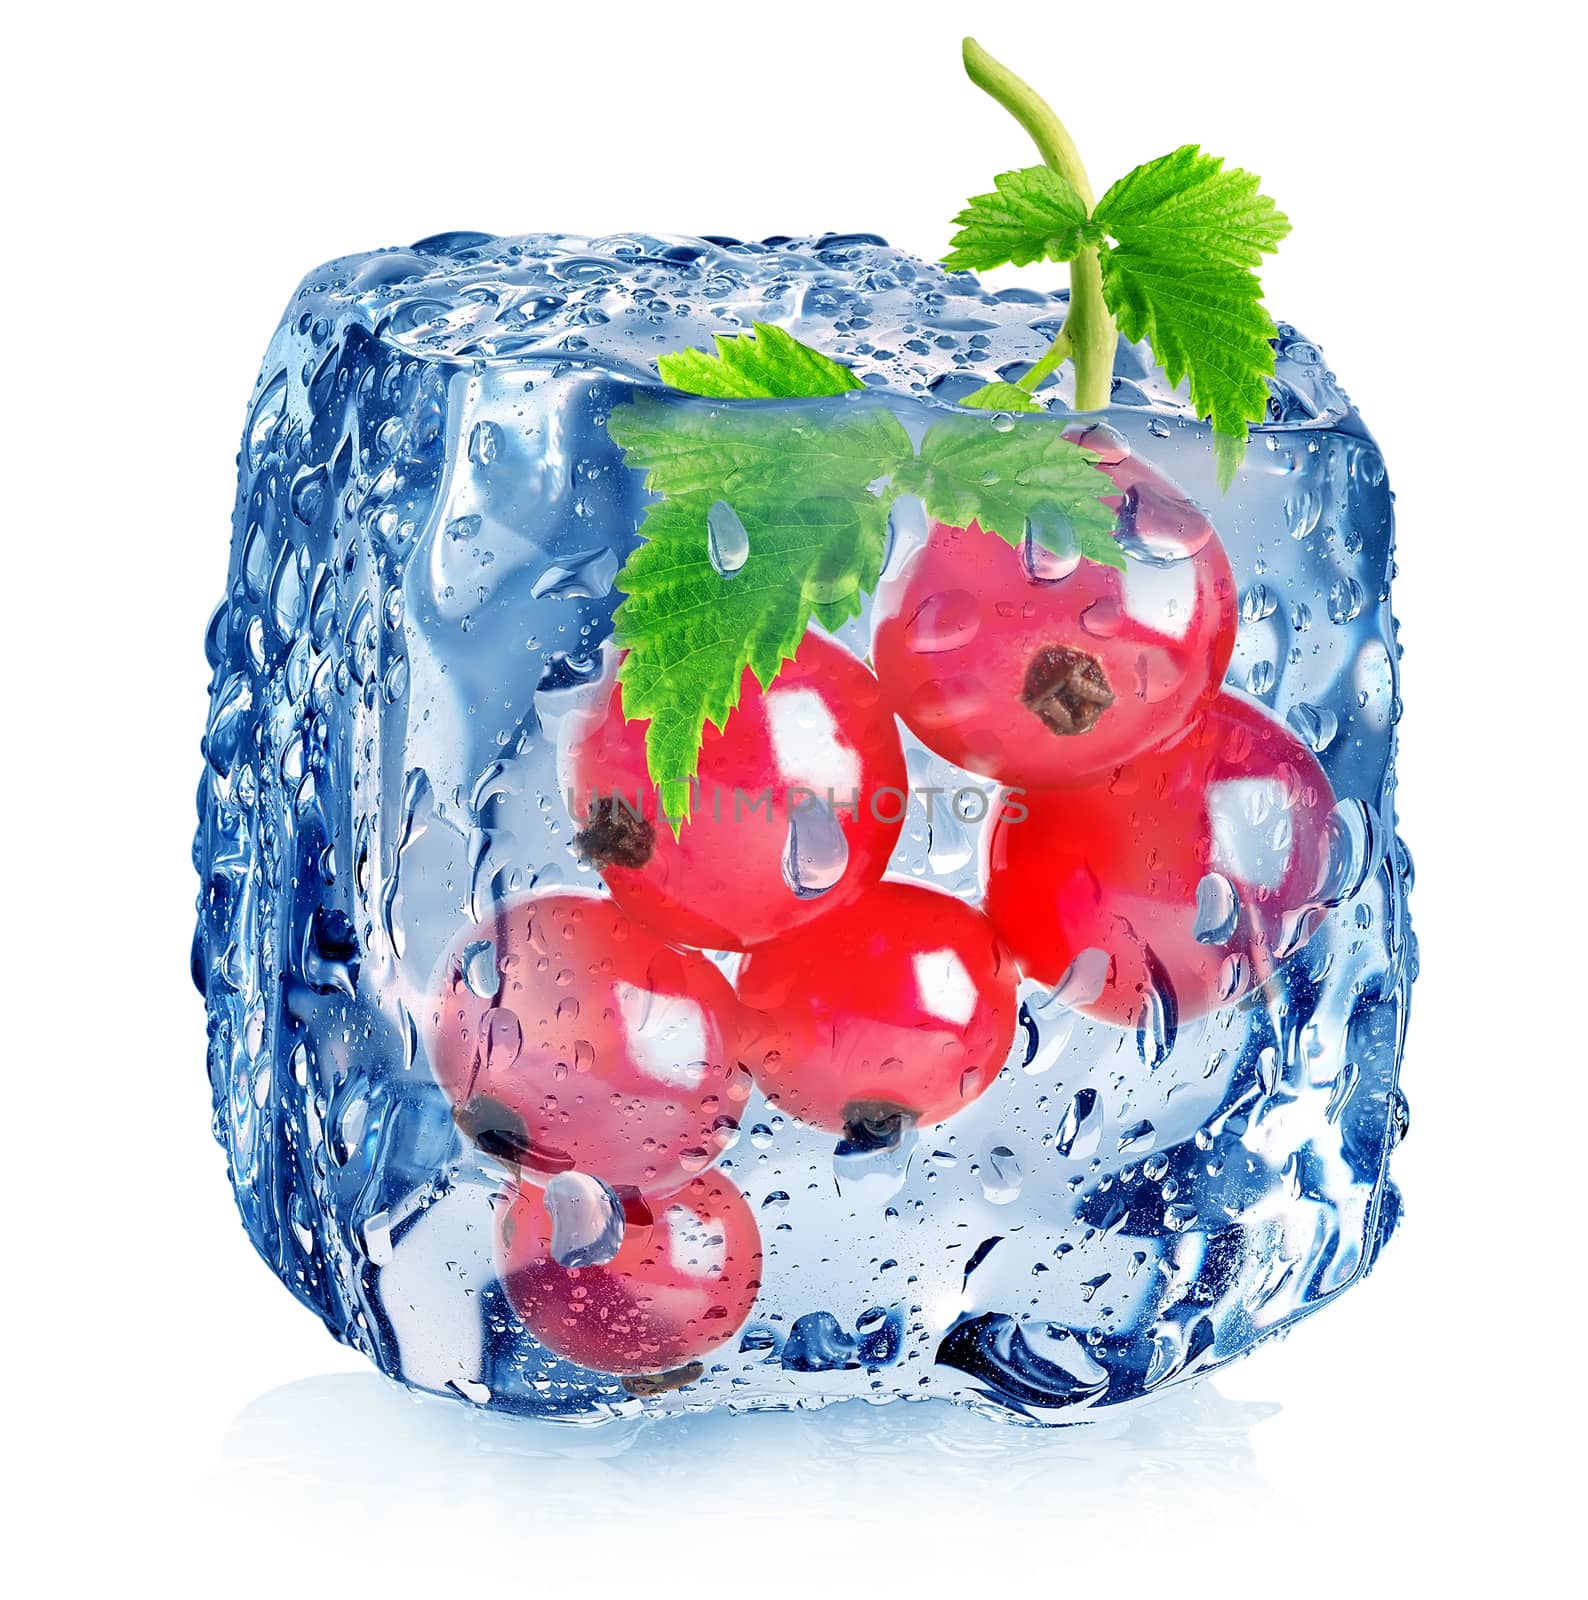 Red berries of currant in ice  by Givaga